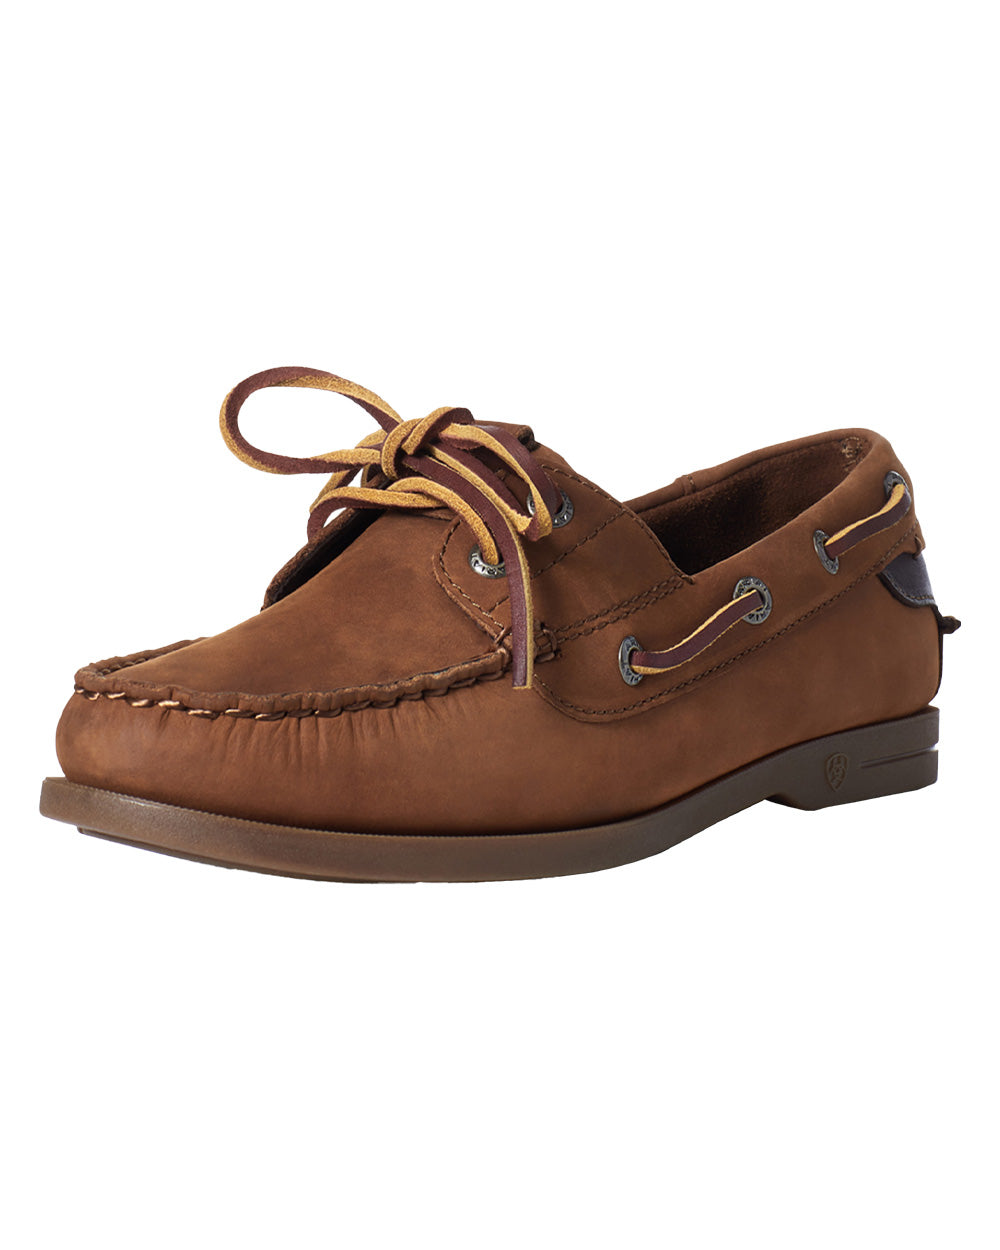 Walnut coloured Ariat Womens Antigua Boat Shoes on White background 